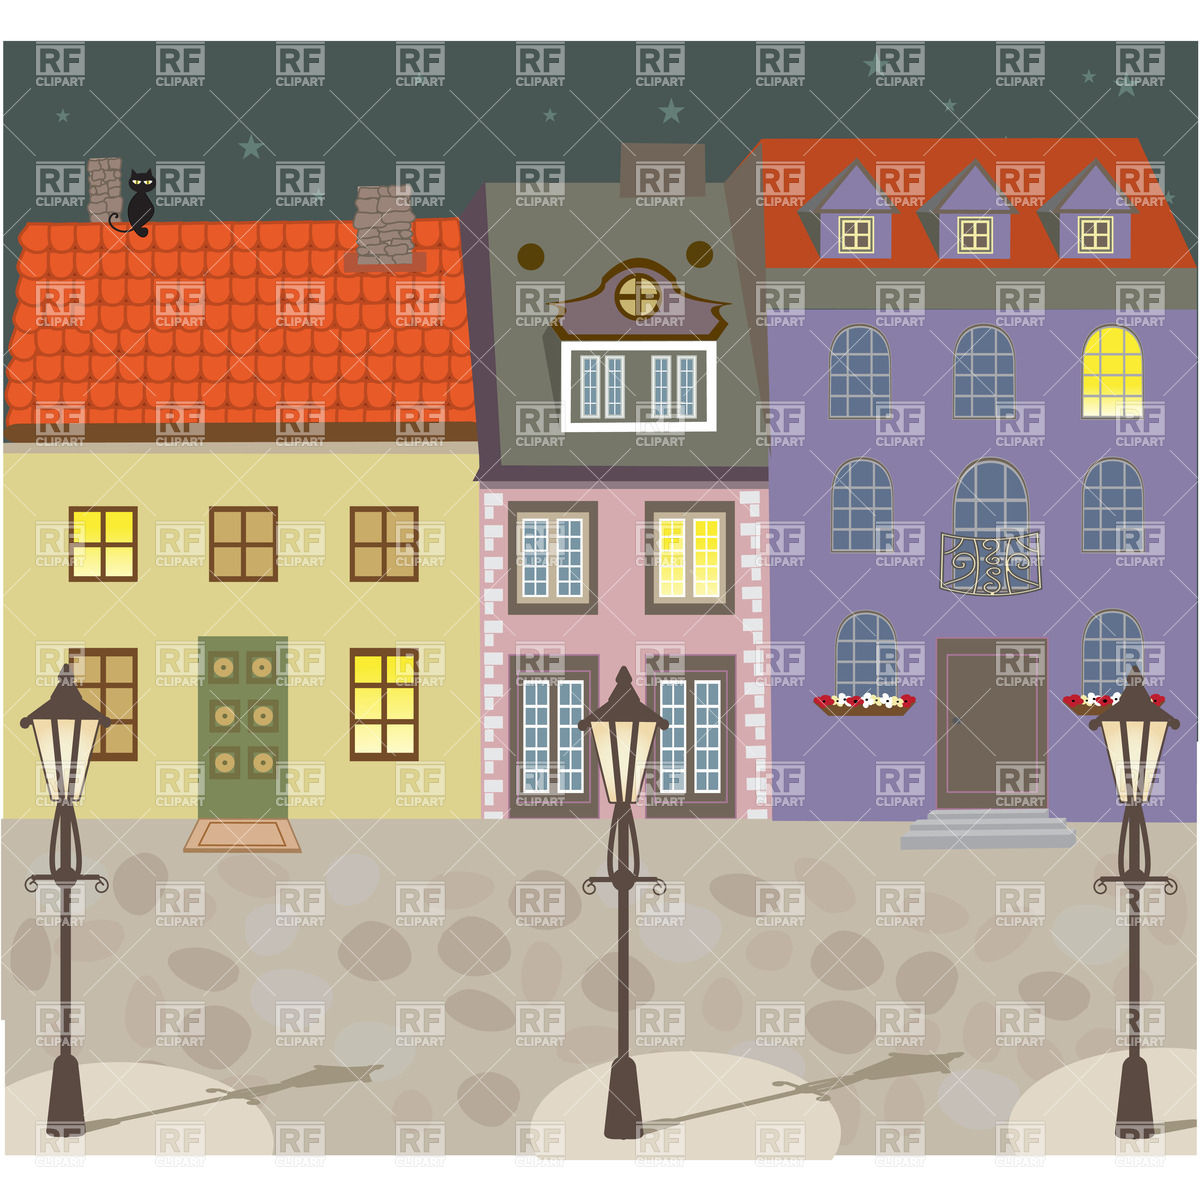 Old European Street With Street Lights Paving Blocks And Tiled Houses